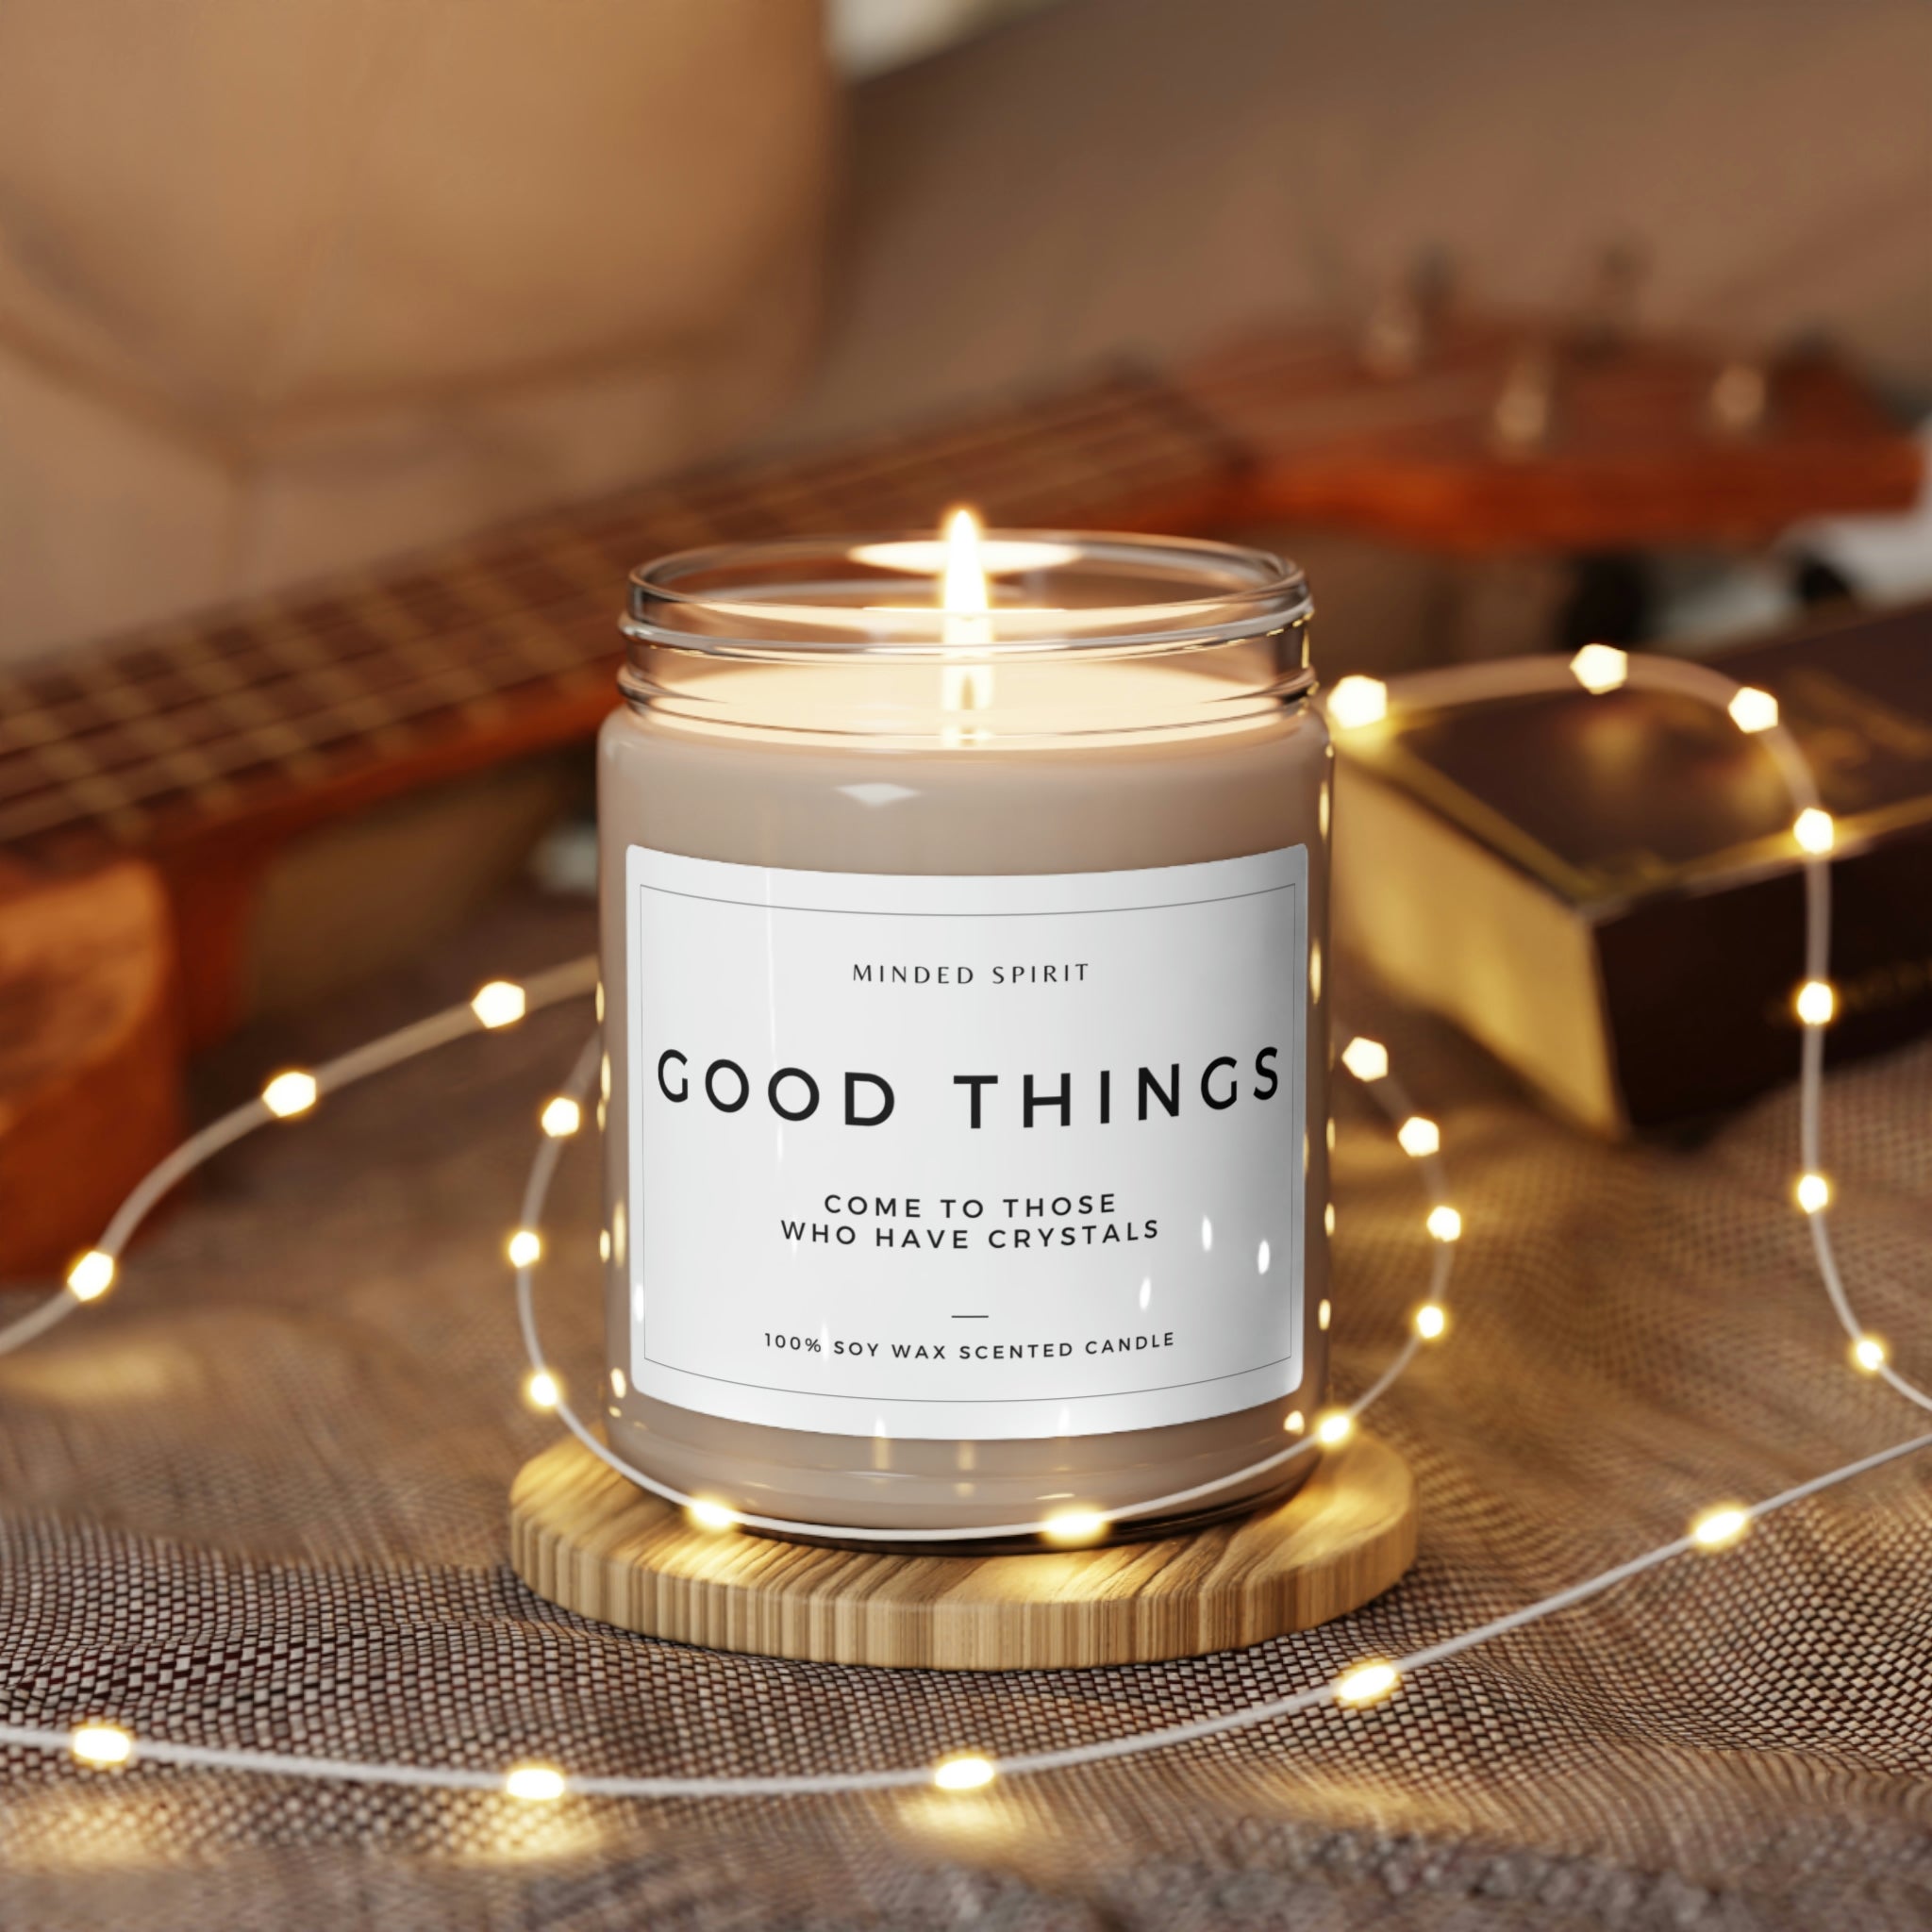 Good Things Sassy Self-Help Scented Candle